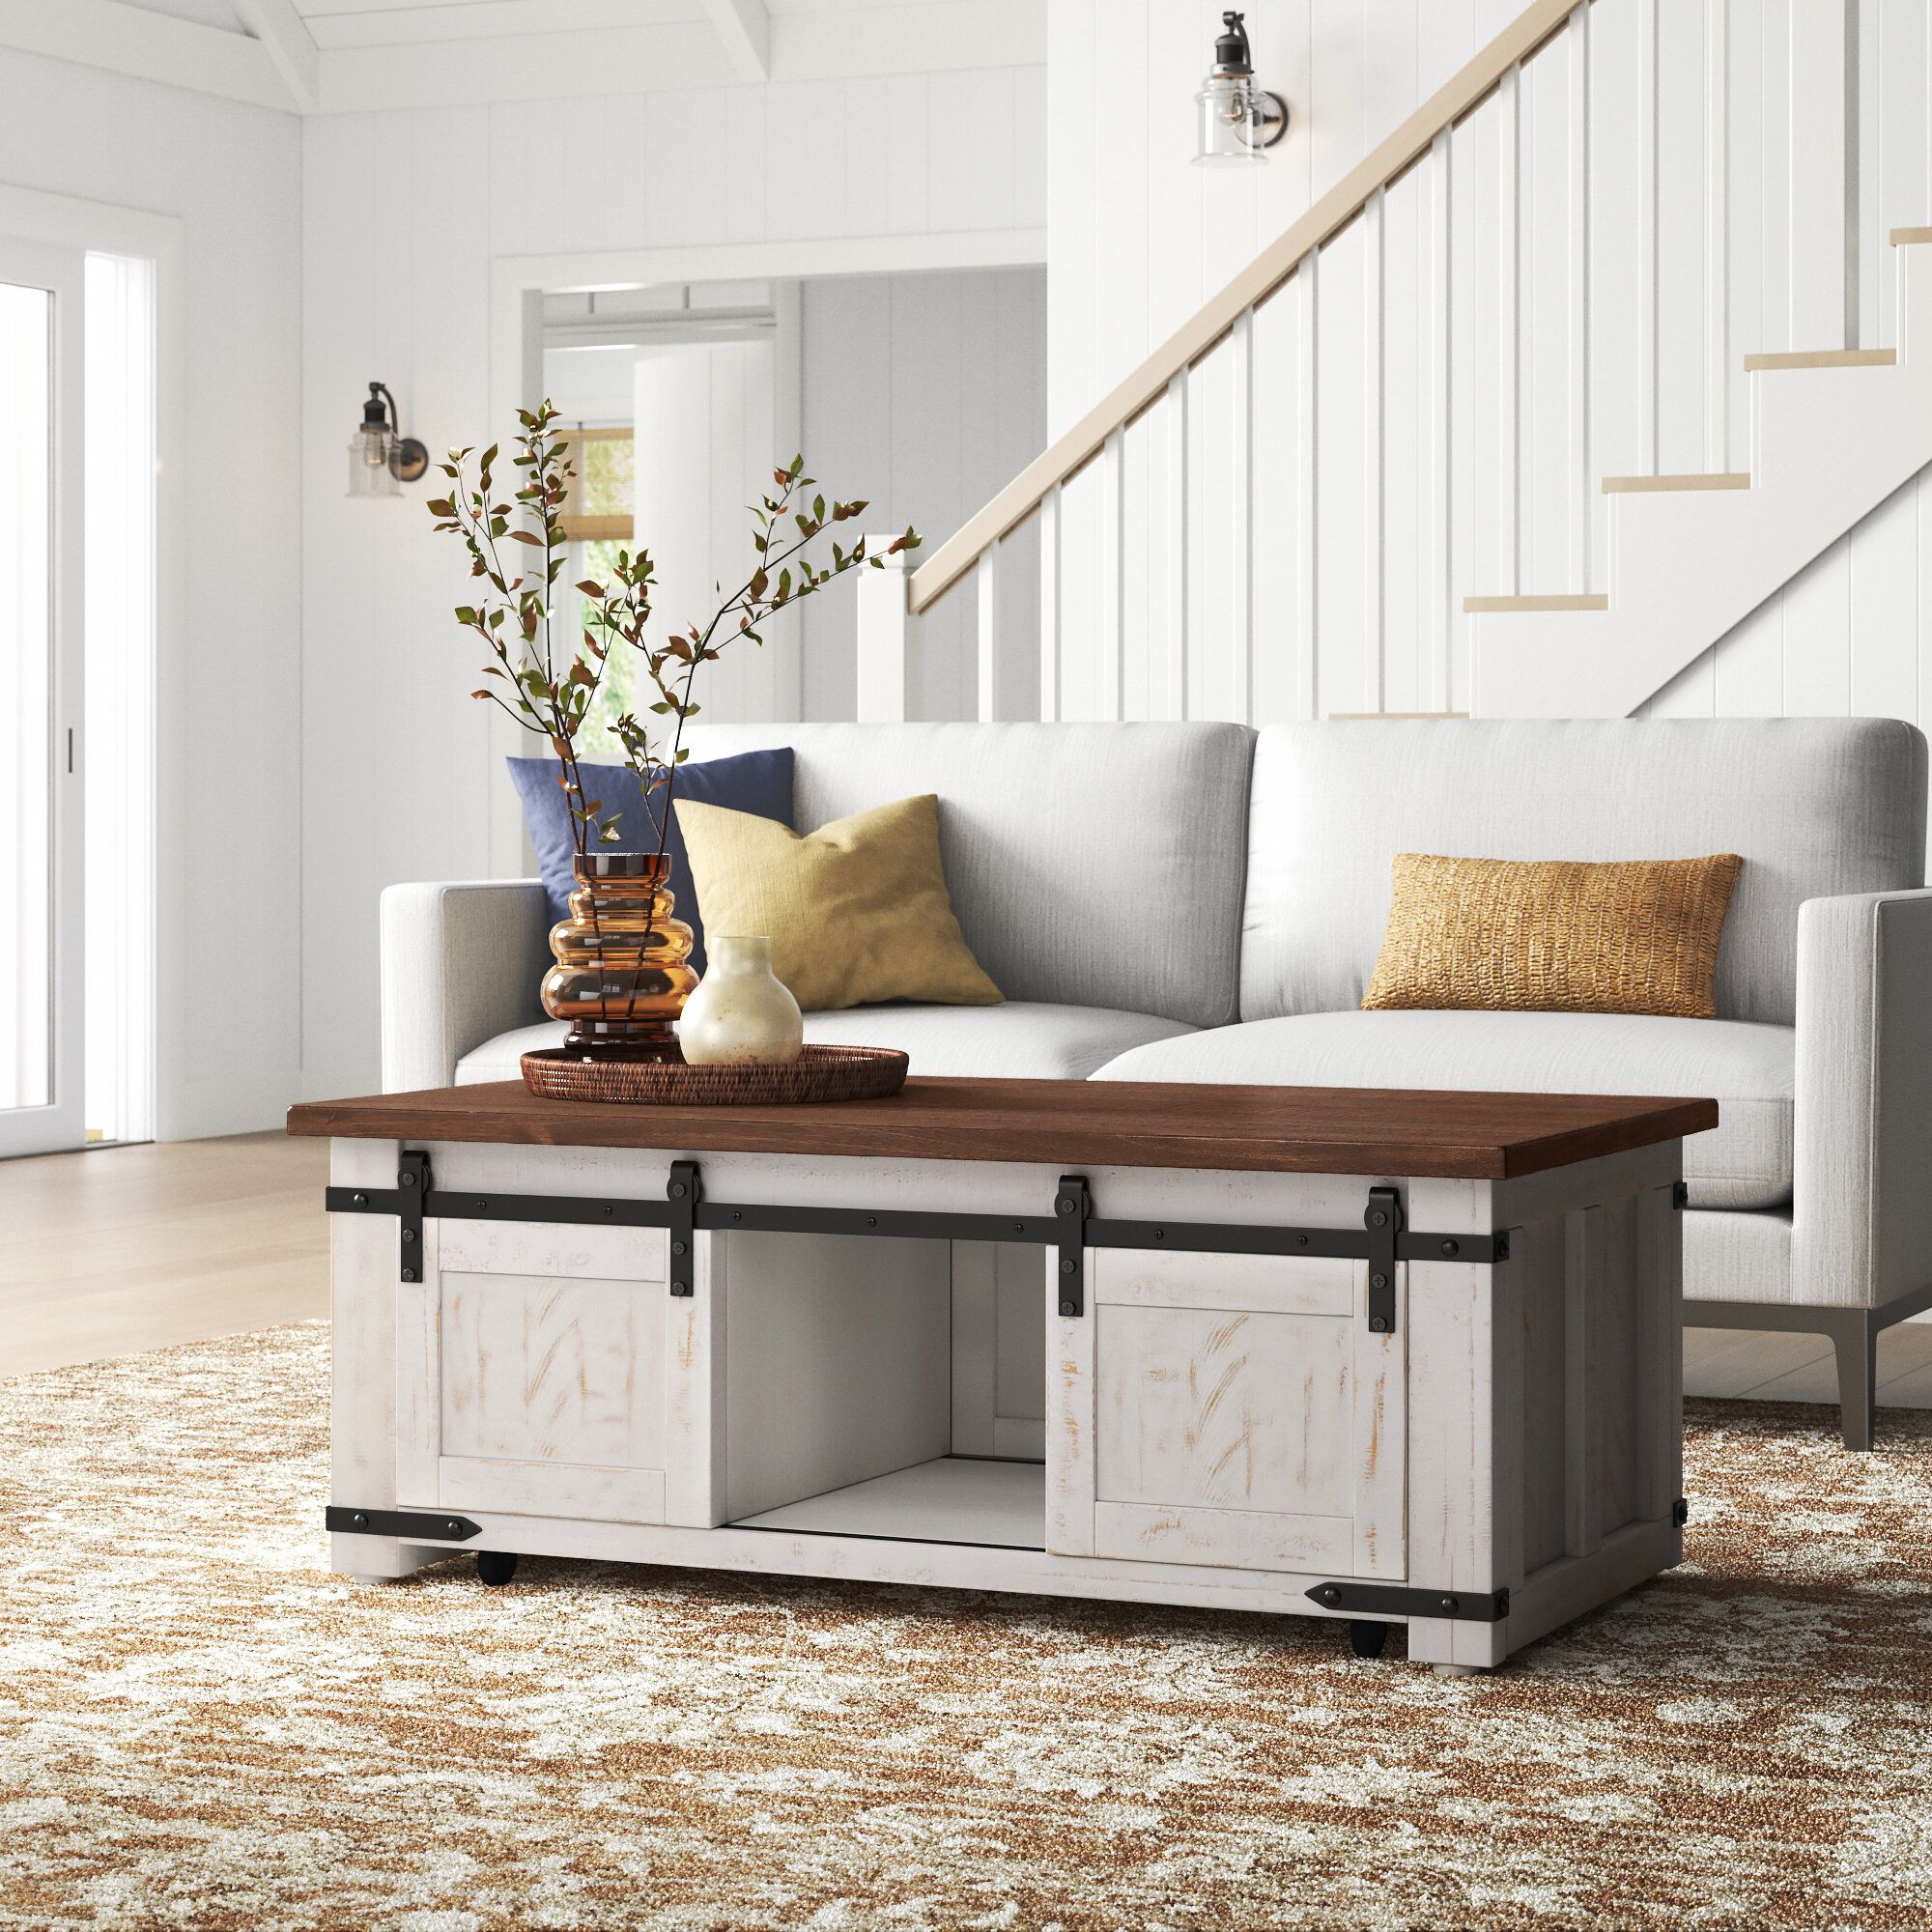 Sand & Stable Sean Coffee Table & Reviews | Wayfair With Regard To Coffee Tables With Sliding Barn Doors (Photo 9 of 15)